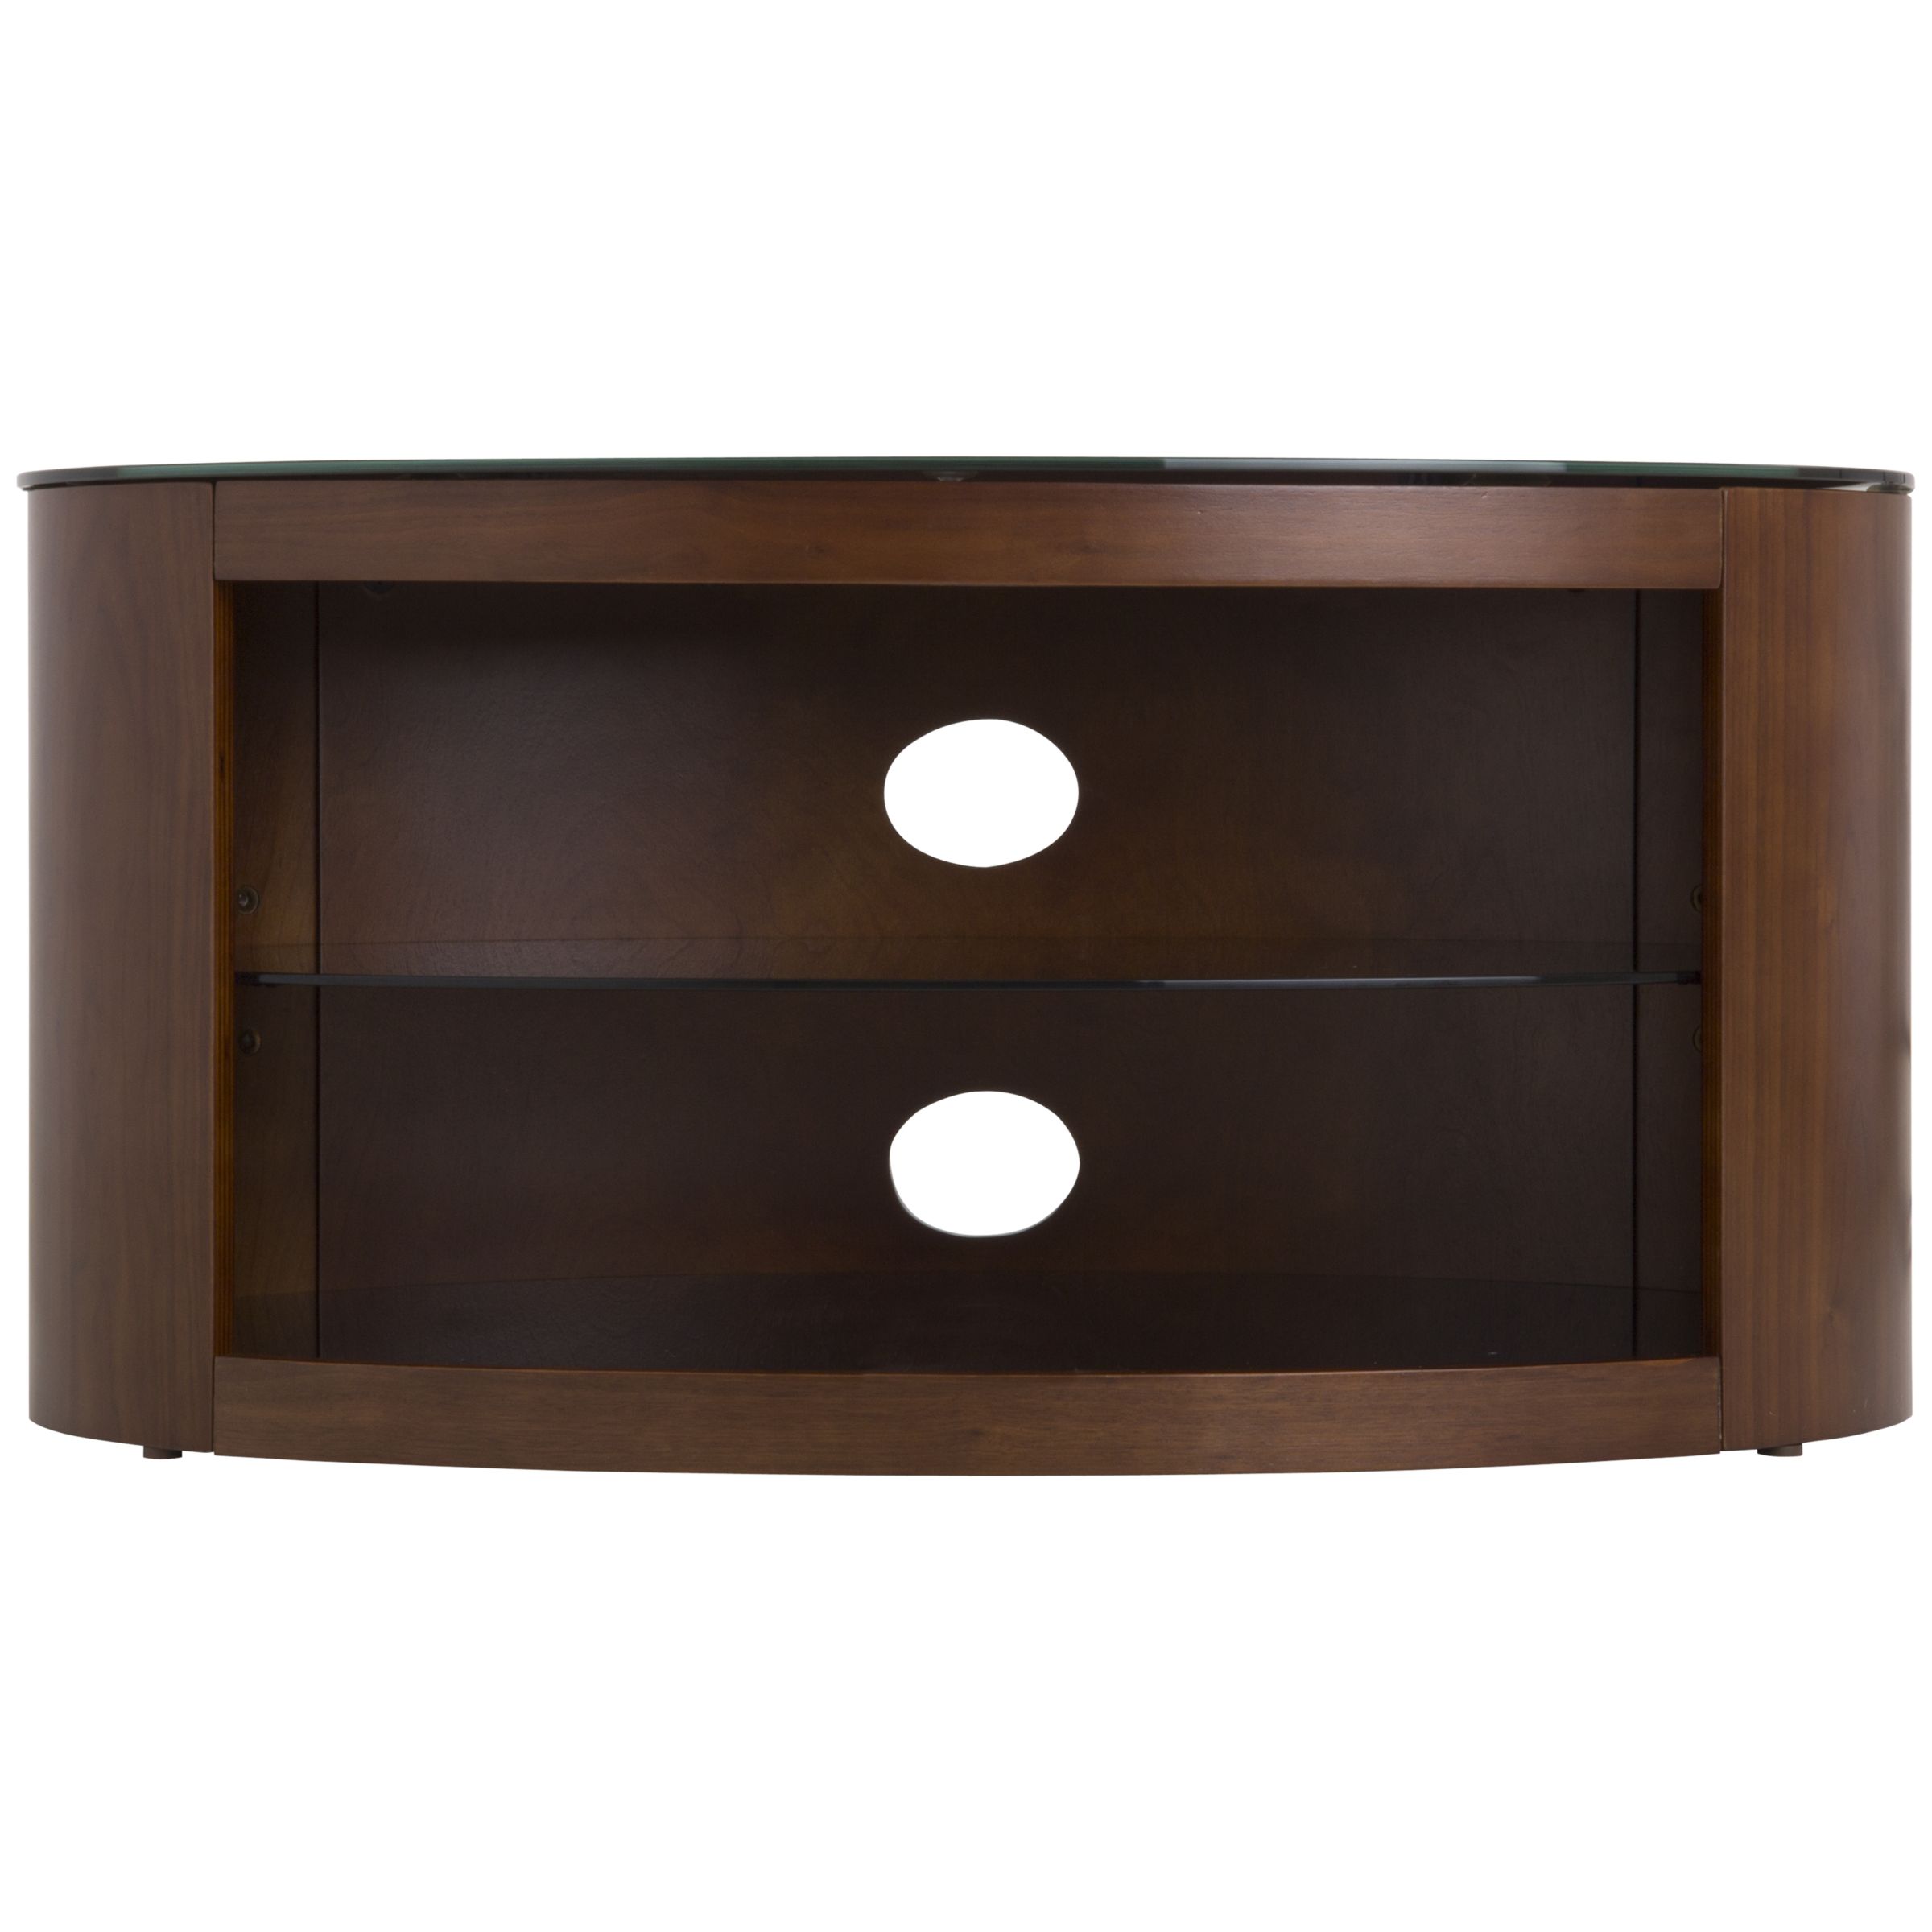 AVF Buckingham 800 TV Stand for TVs up to 37-inches, Walnut, width 80cm